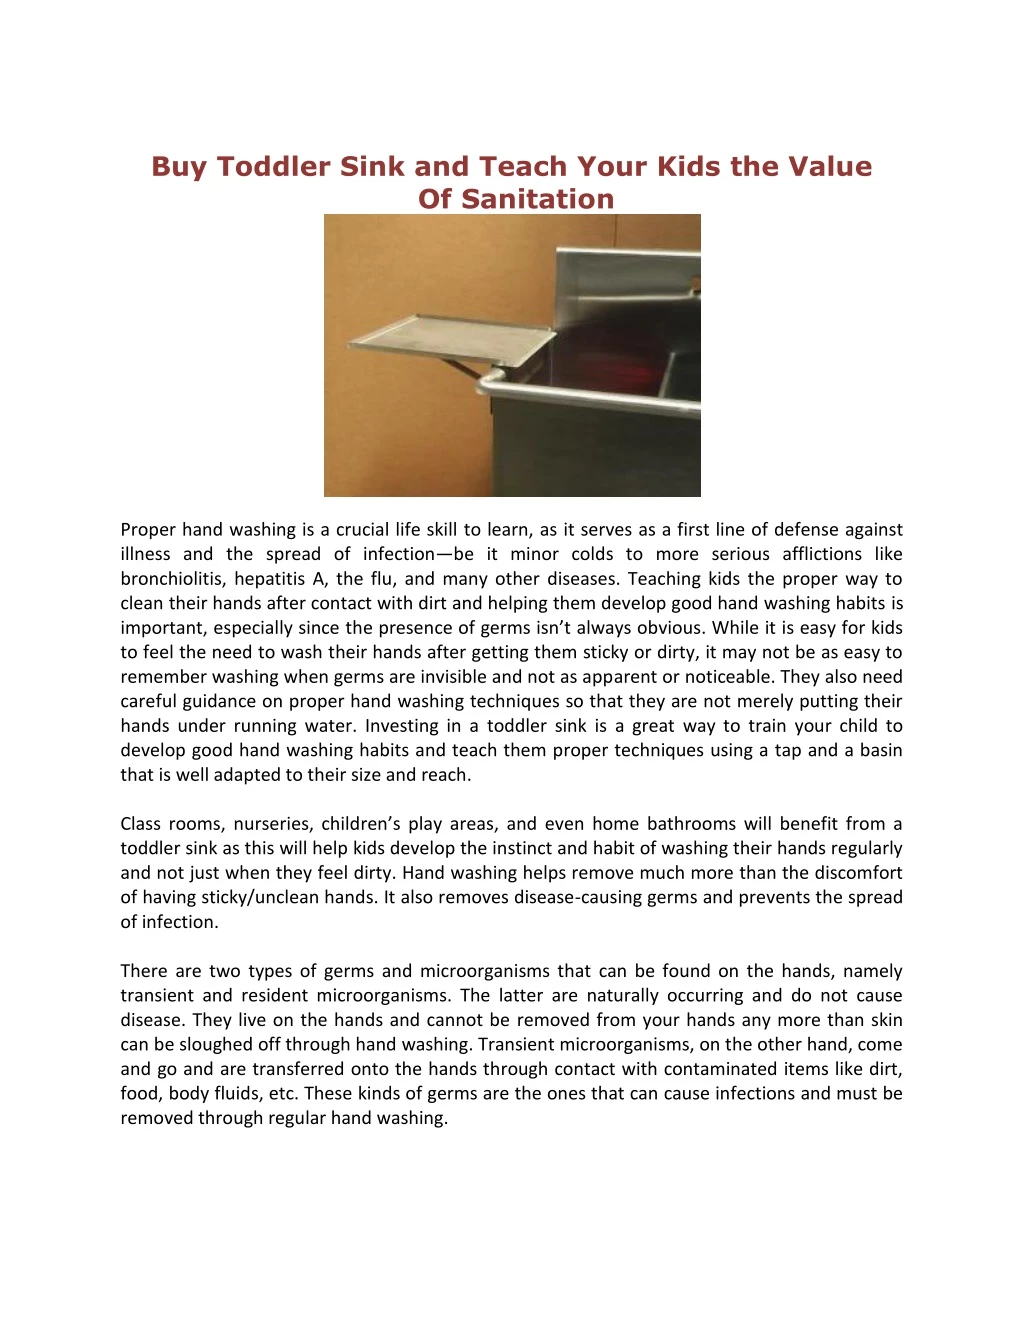 buy toddler sink and teach your kids the value